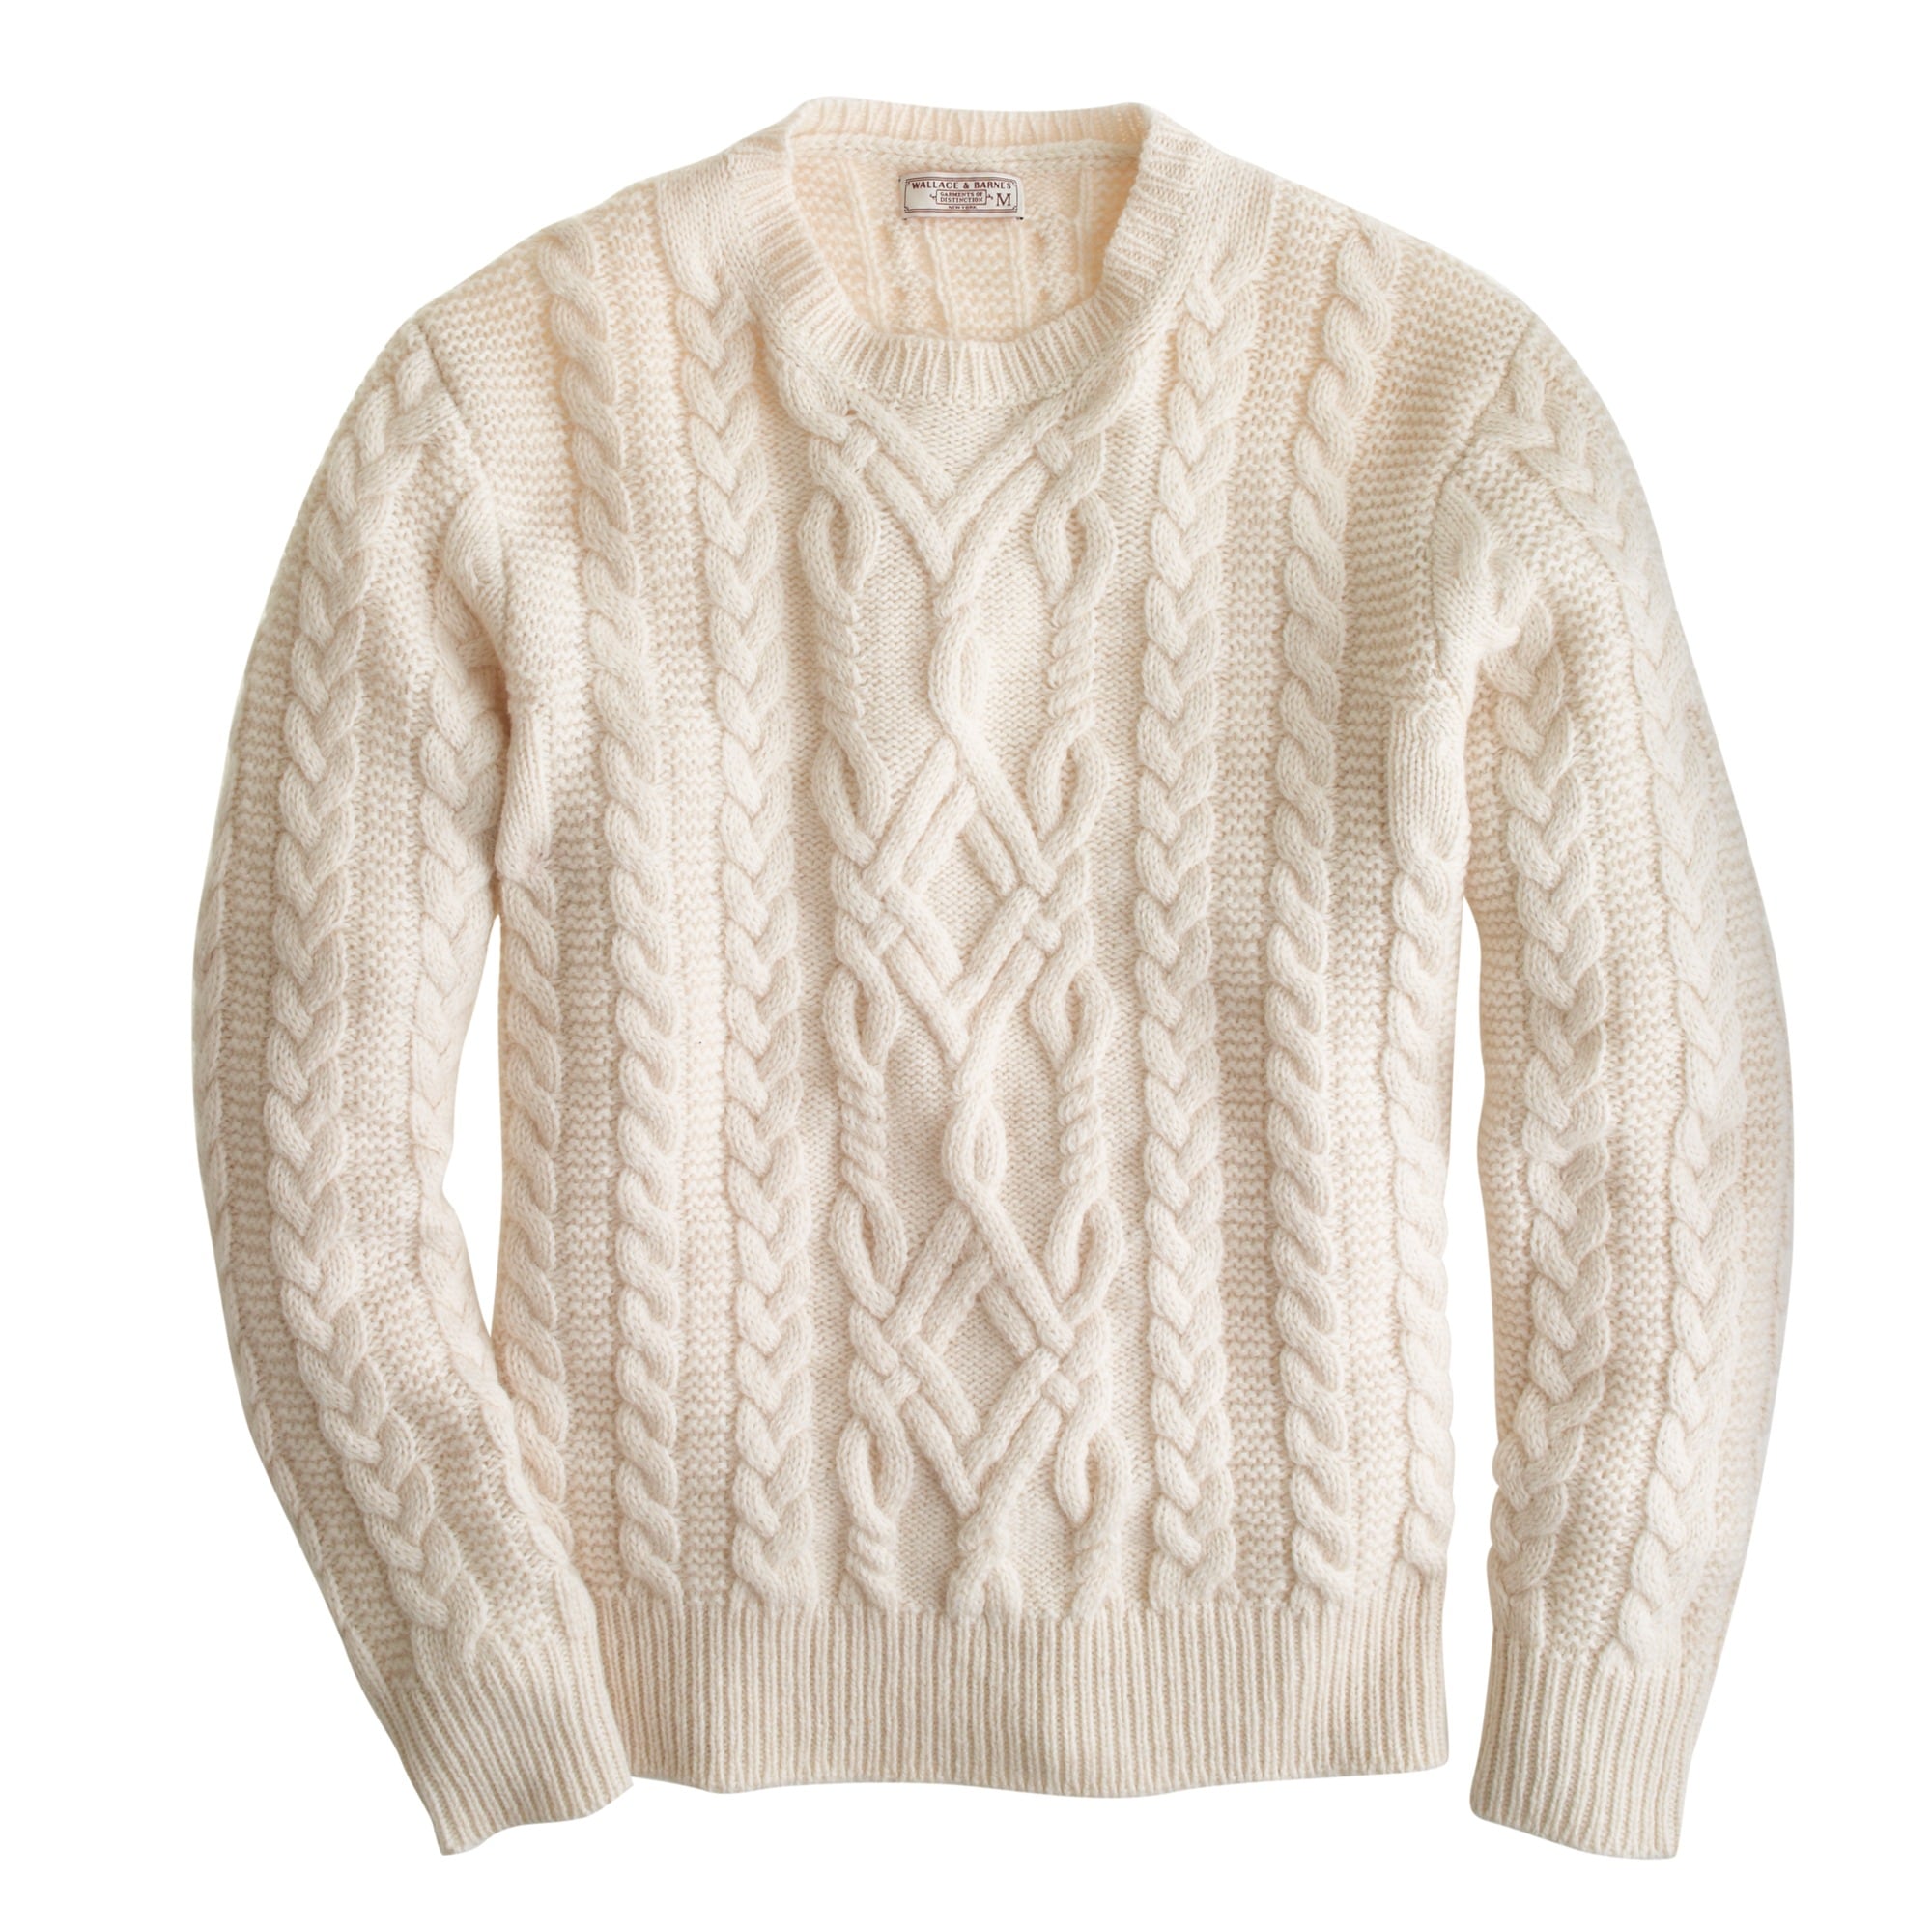 J.Crew: Wallace & Barnes Shetland Wool Cable Sweater For Men